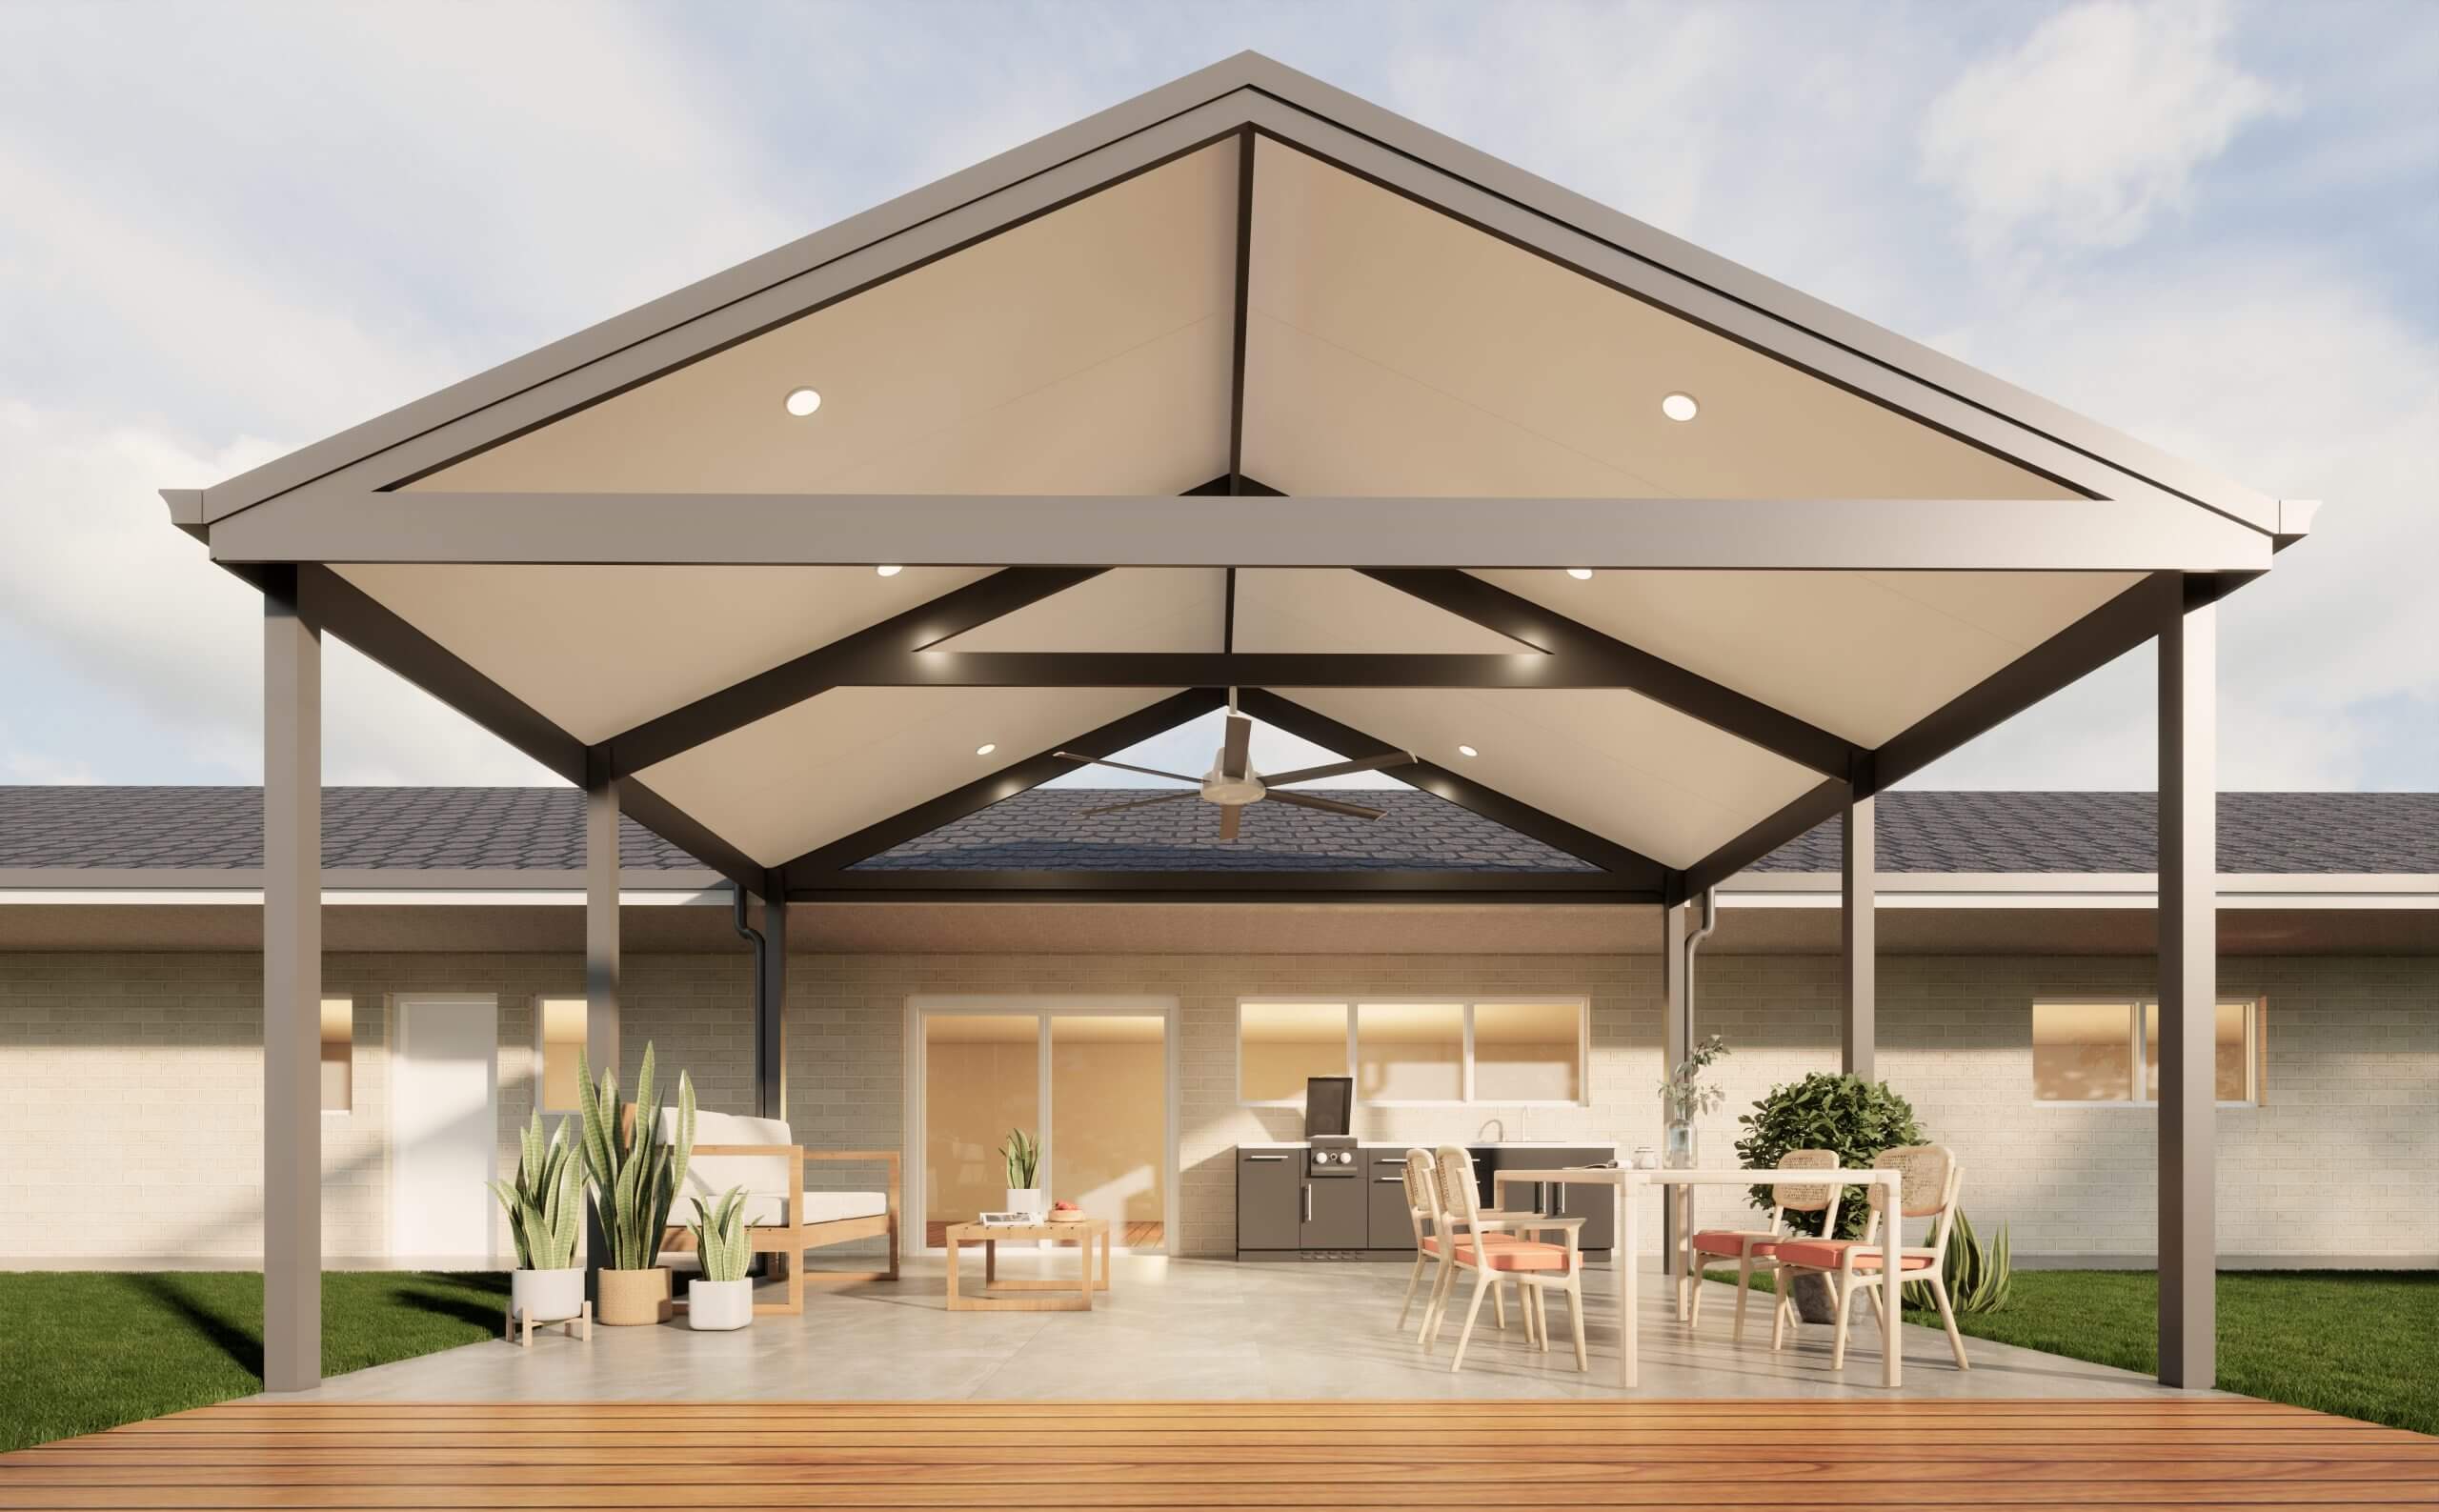 How To Build A Gable Roof Over A Patio